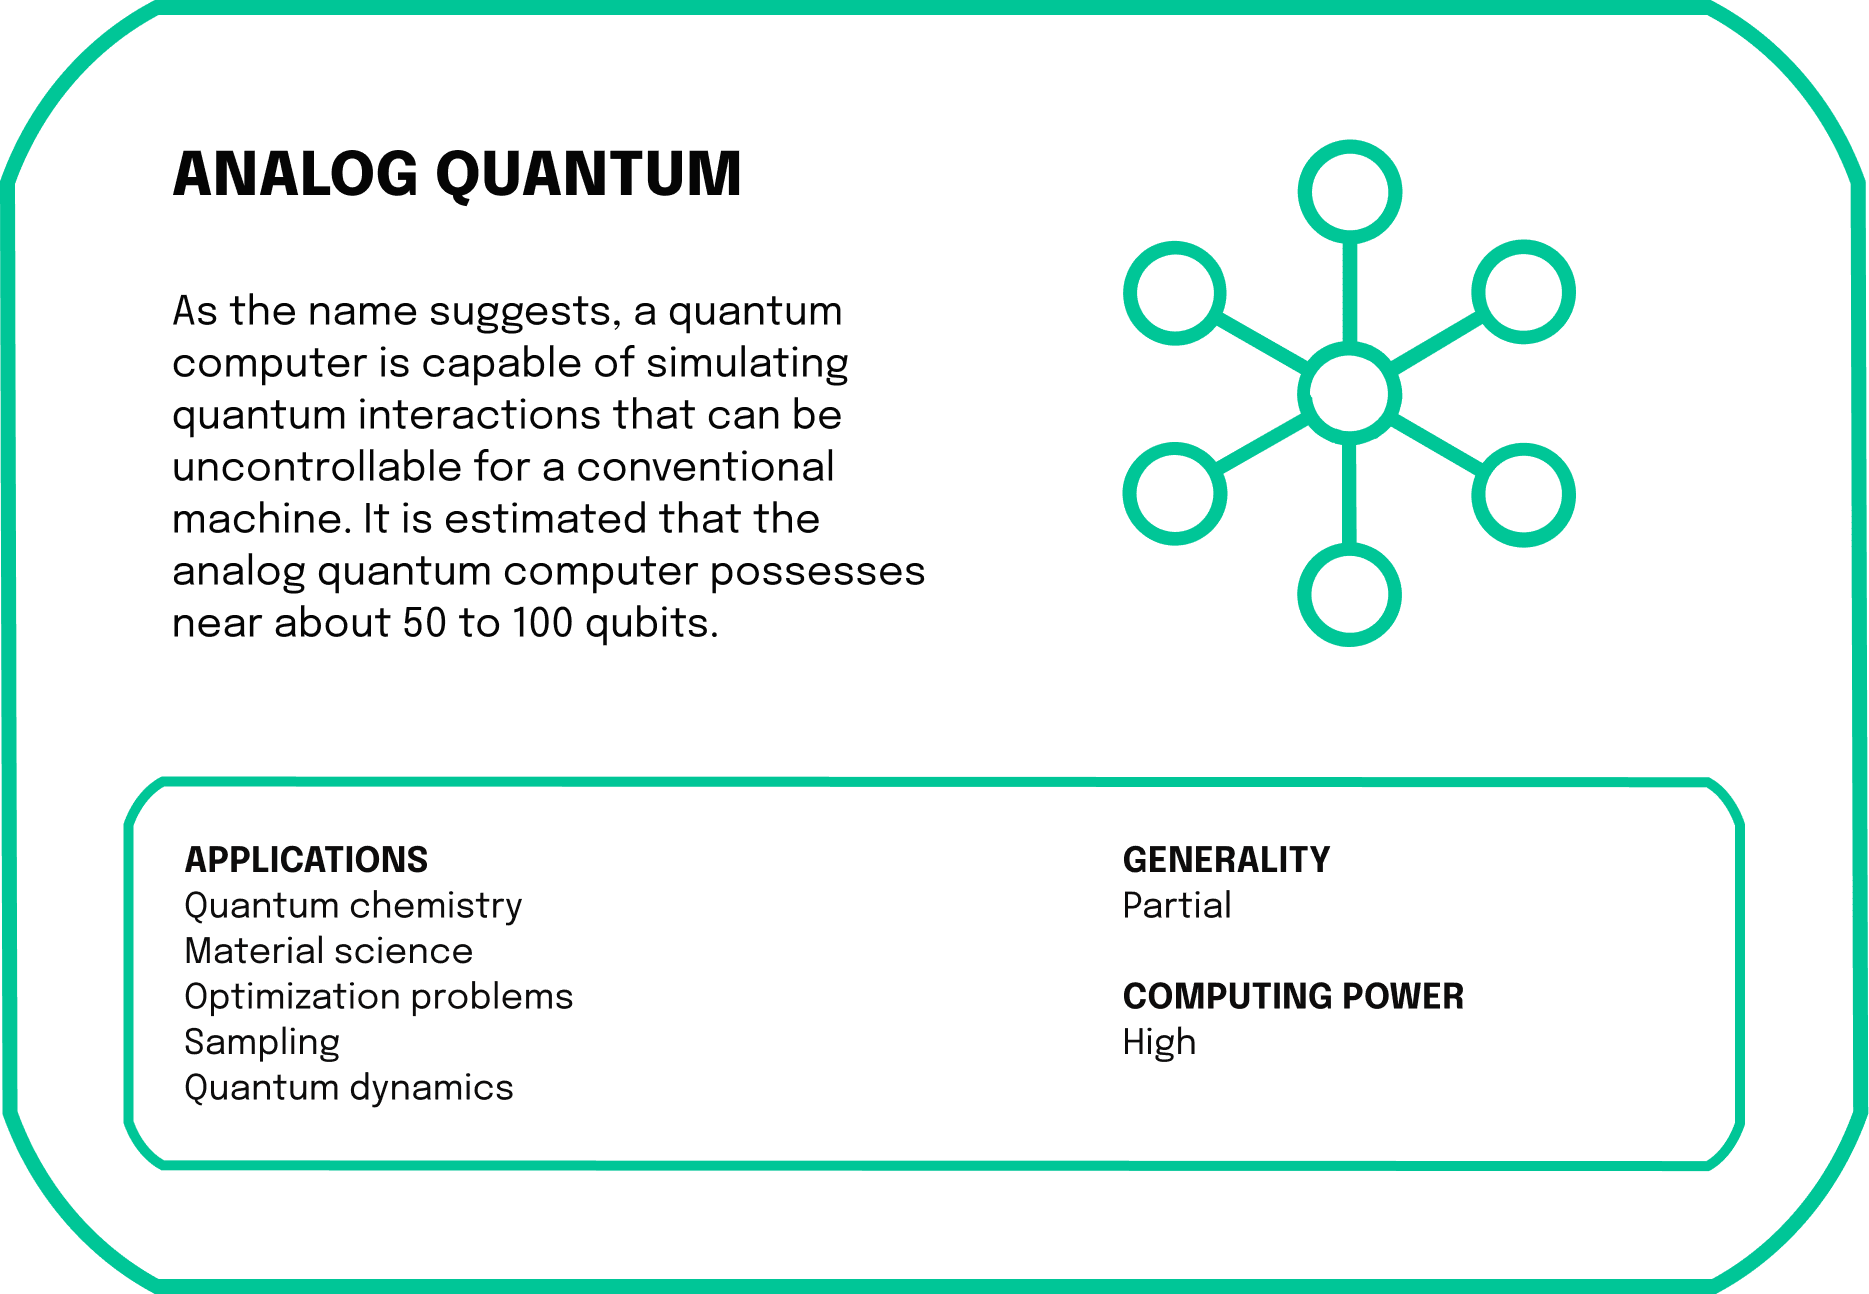 A quantum computer is capable of simulating quantum interactions that can be uncontrollable for a conventional machine. It is estimated that the analog quantum computer possesses near about 50 to 100 qubits.